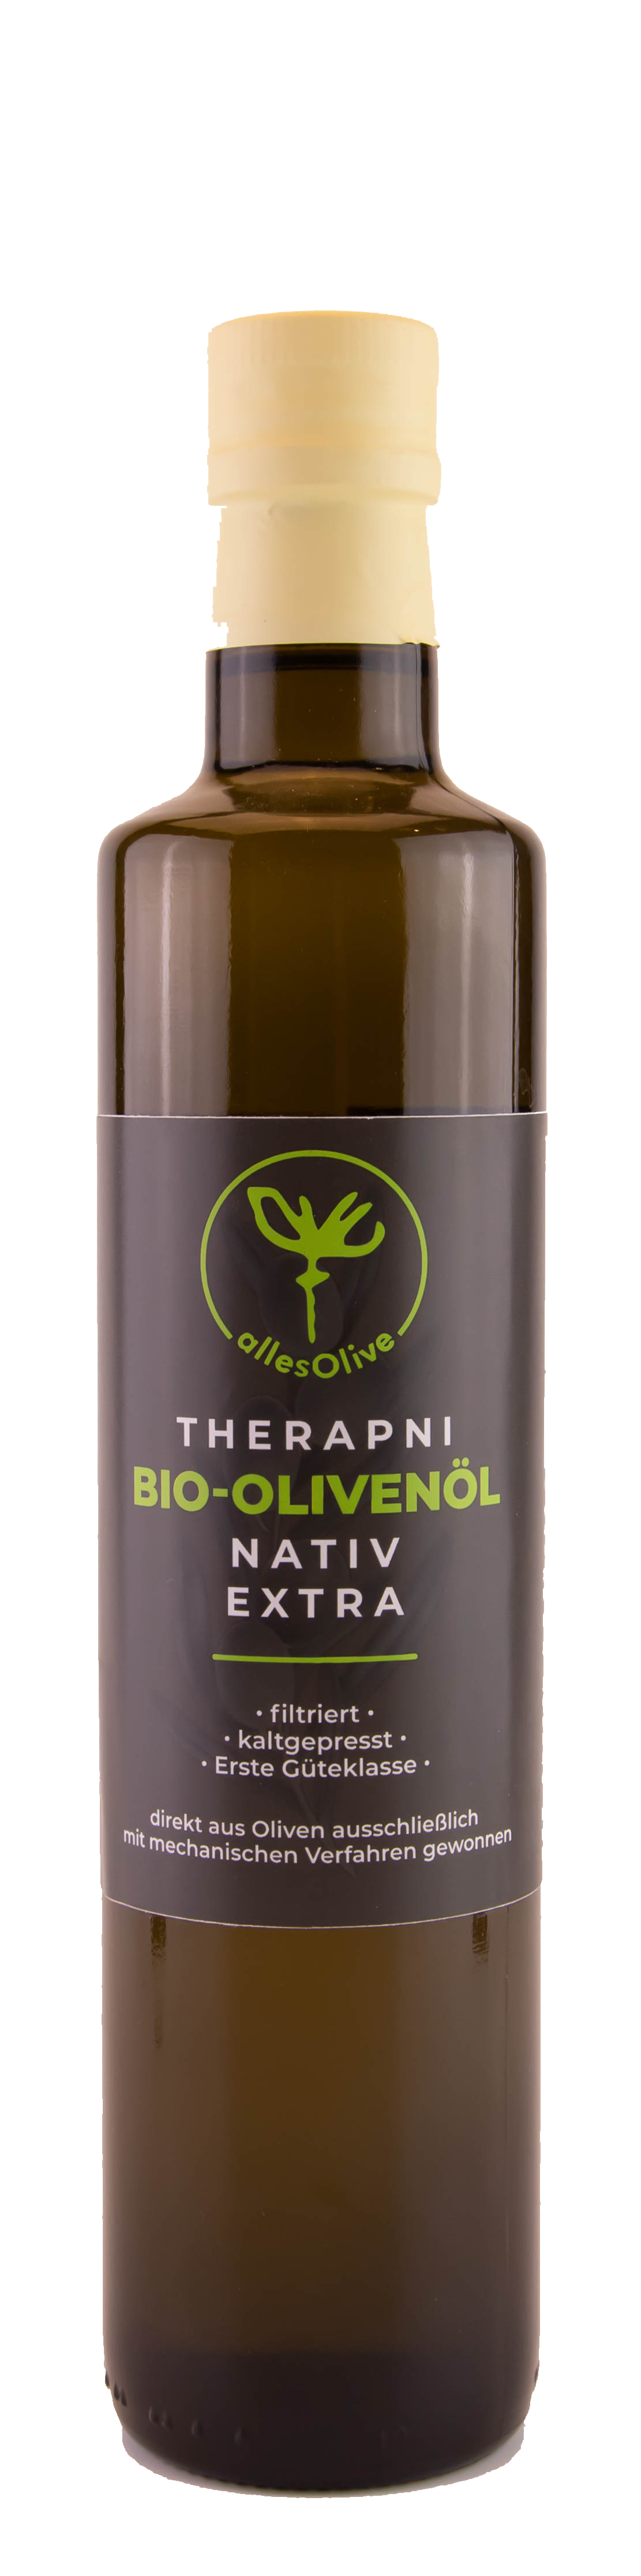 THERAPNI Native Organic Extra Virgin Olive Oil, filtered, 500ml bottle.